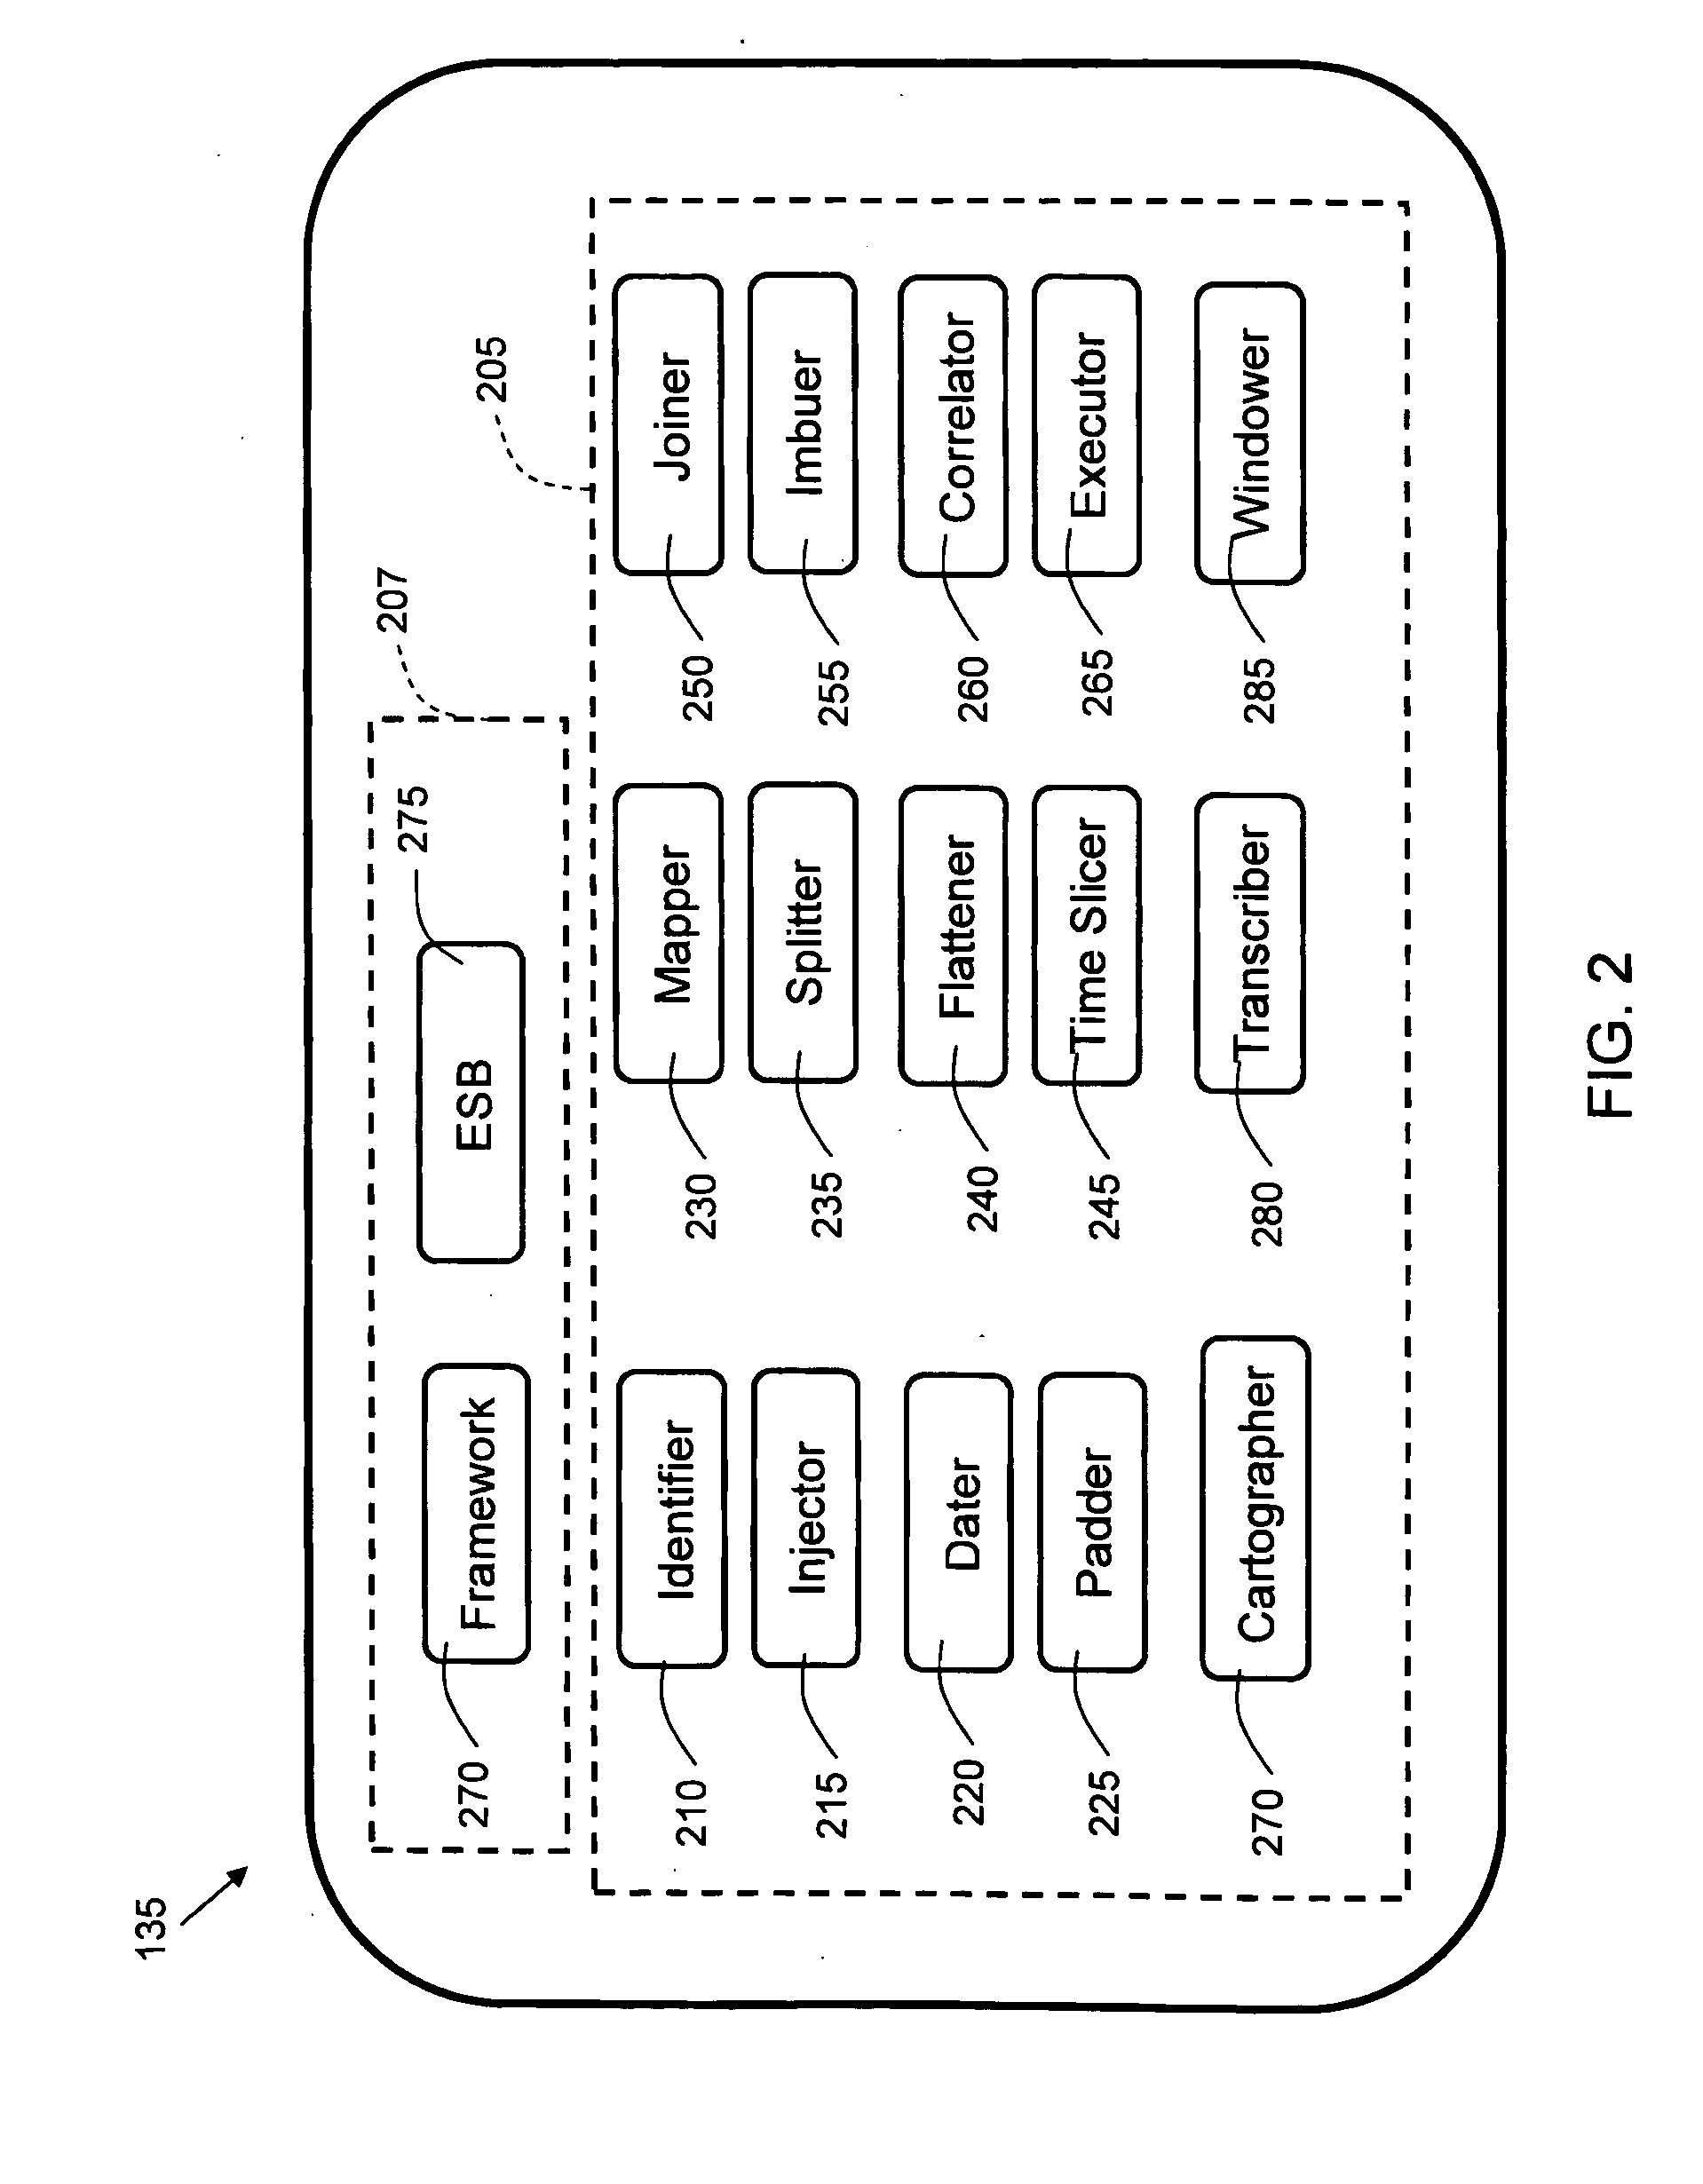 System and method for metering and analyzing usage and performance data of a virtualized compute and network infrastructure